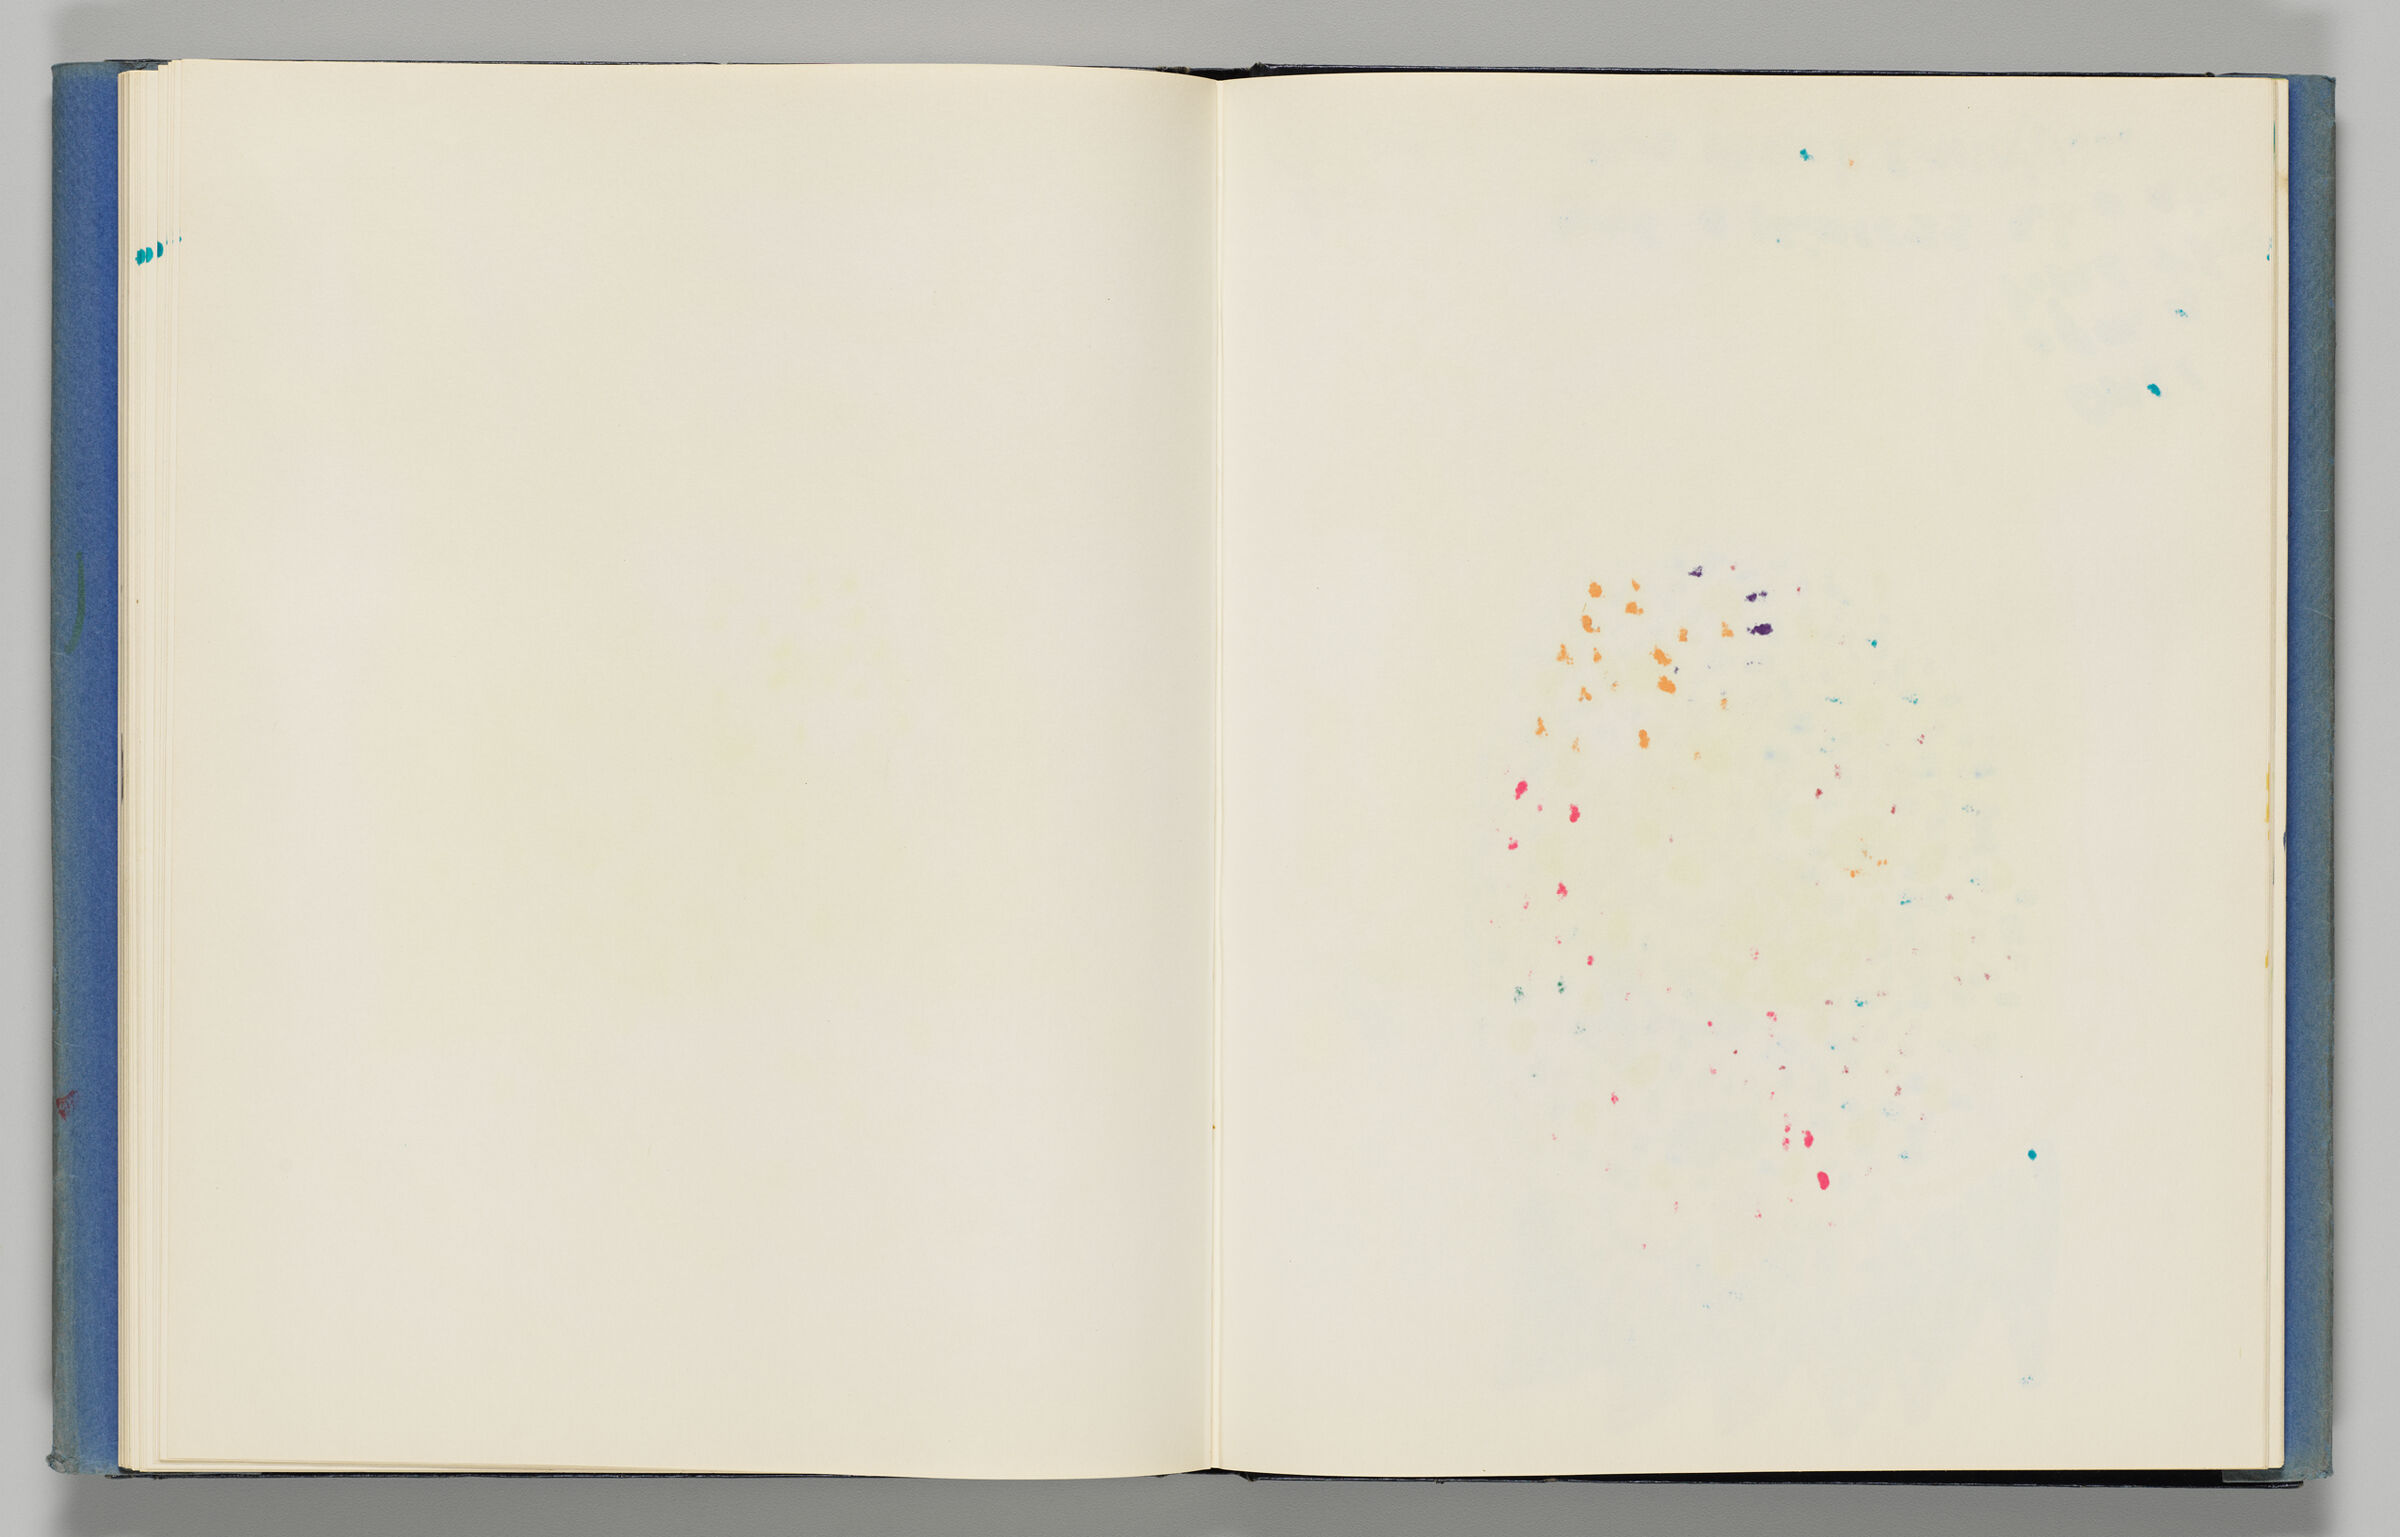 Untitled (Blank, Left Page); Untitled (Blank With Color Transfer, Right Page)